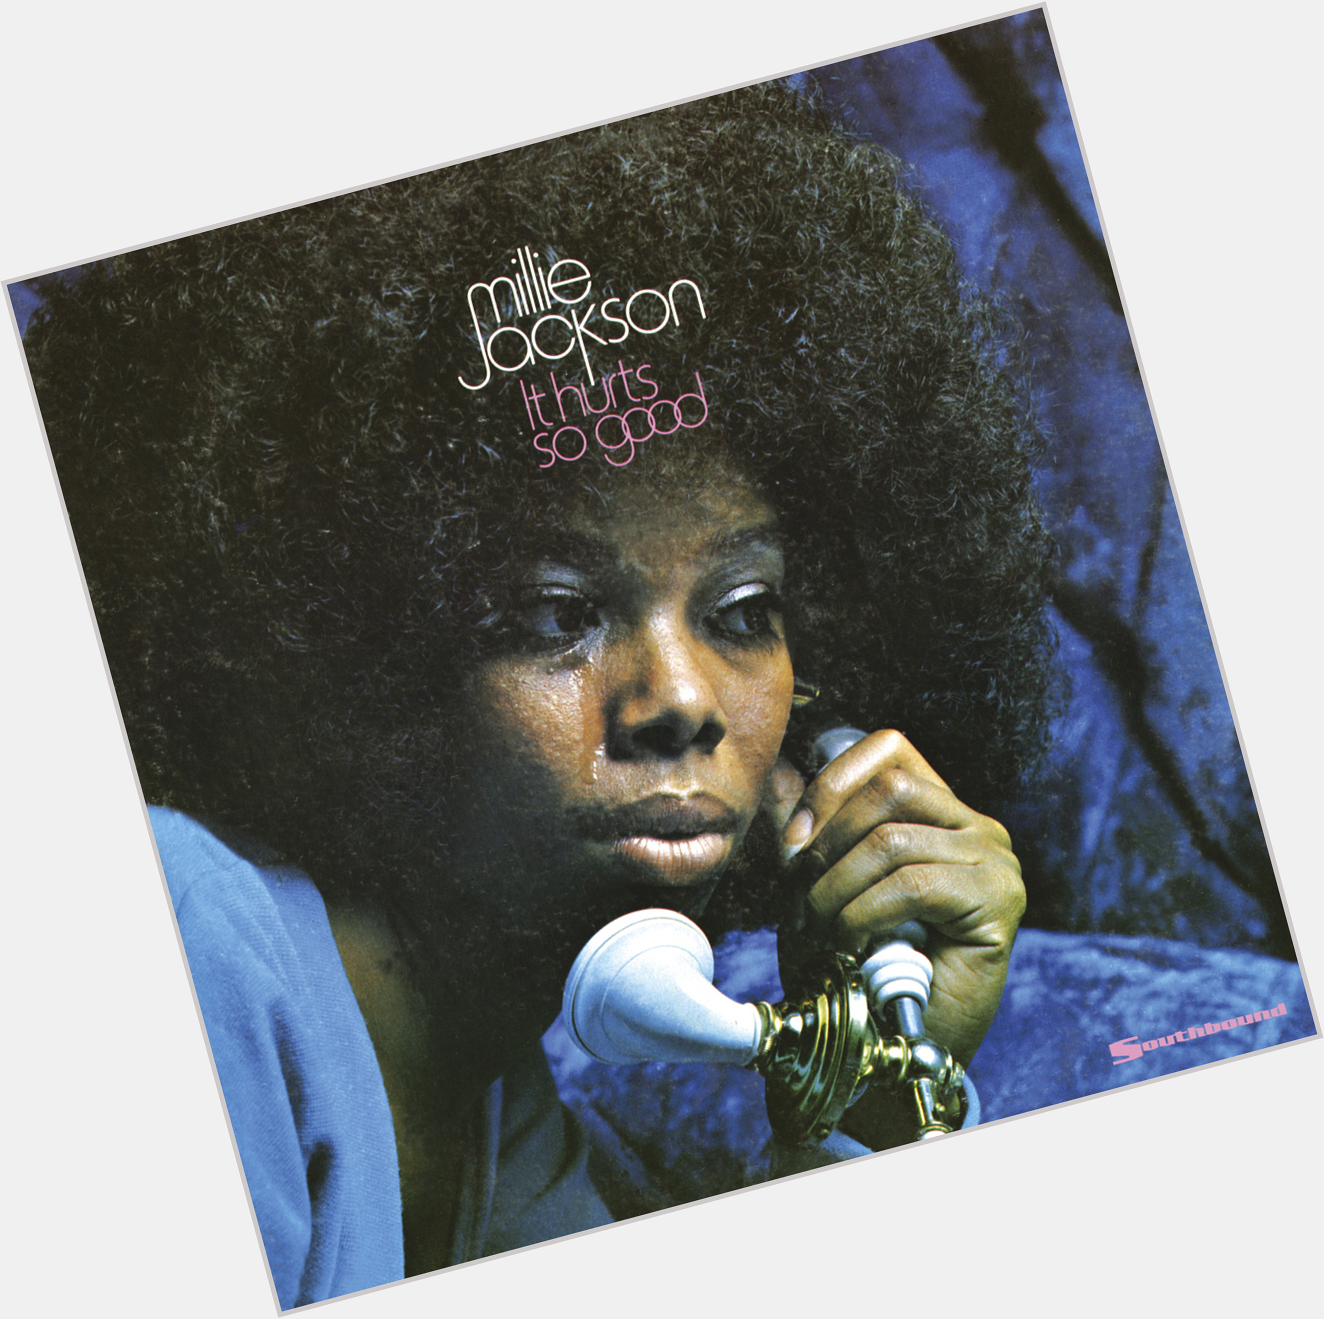 Happy Birthday to the one and only Millie Jackson, born on this day in Thomson, Georgia. 